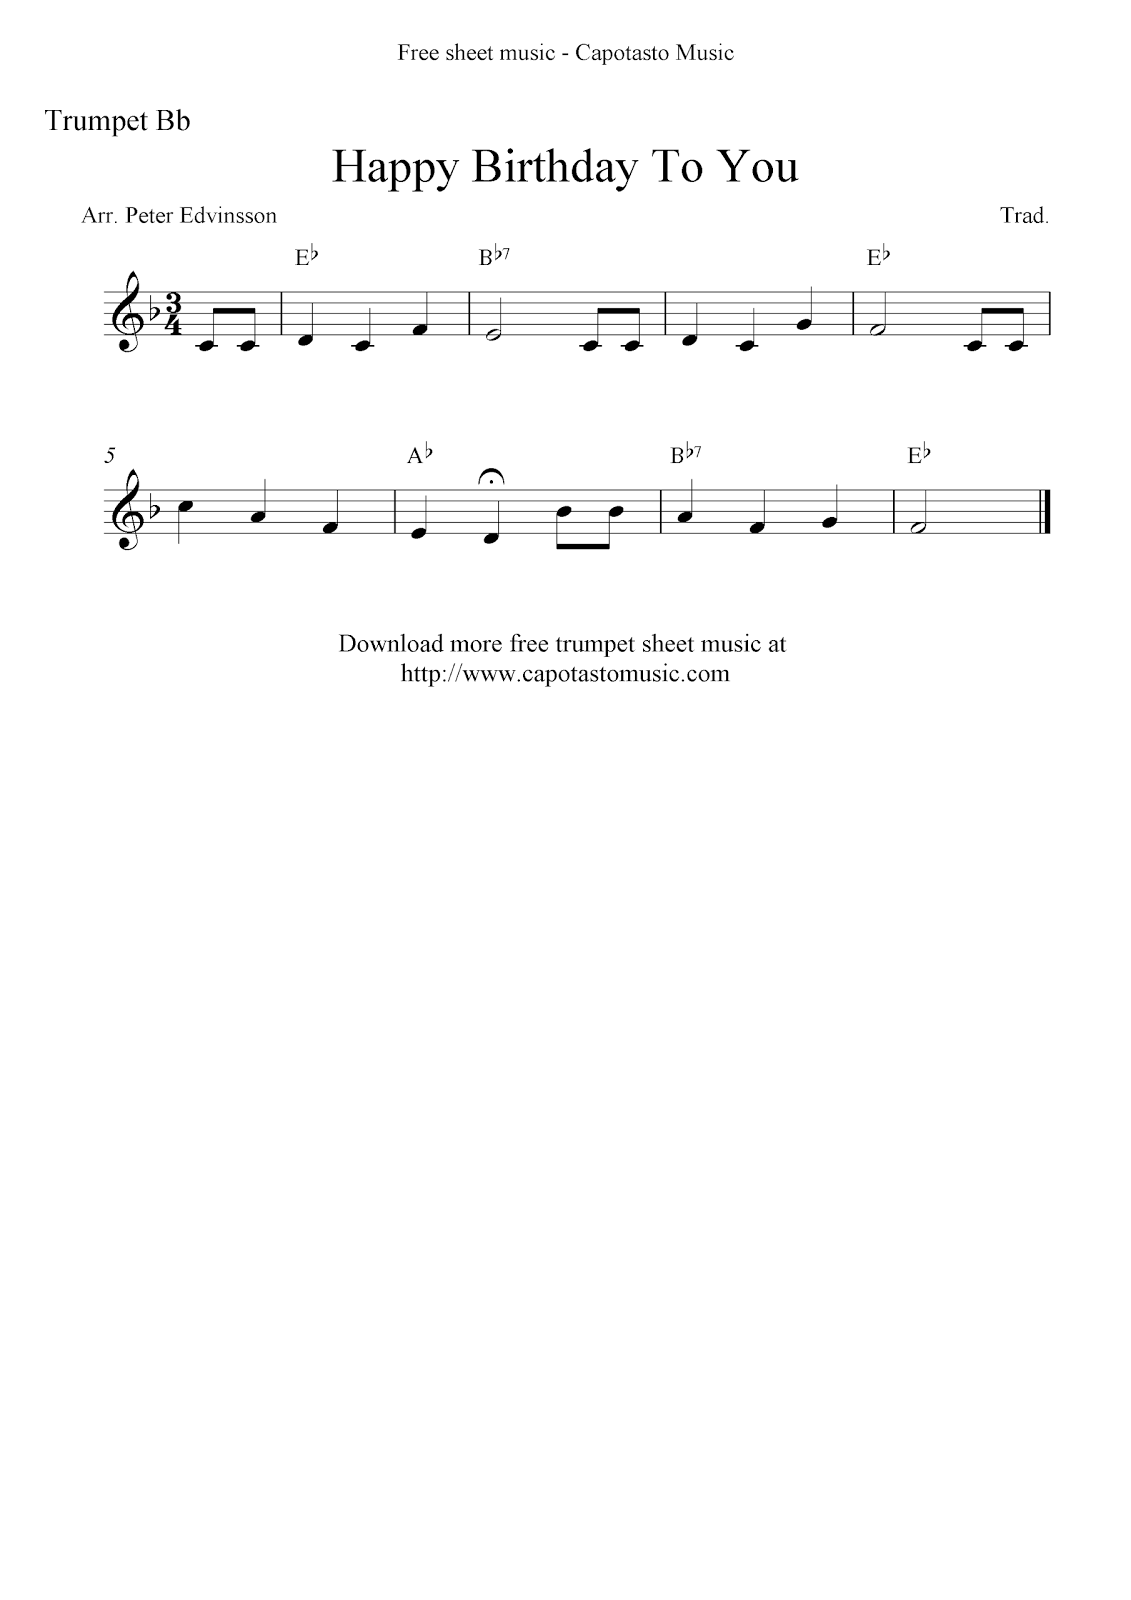 Easy Sheet Music For Beginners: Happy Birthday To You, free trumpet sheet music notes